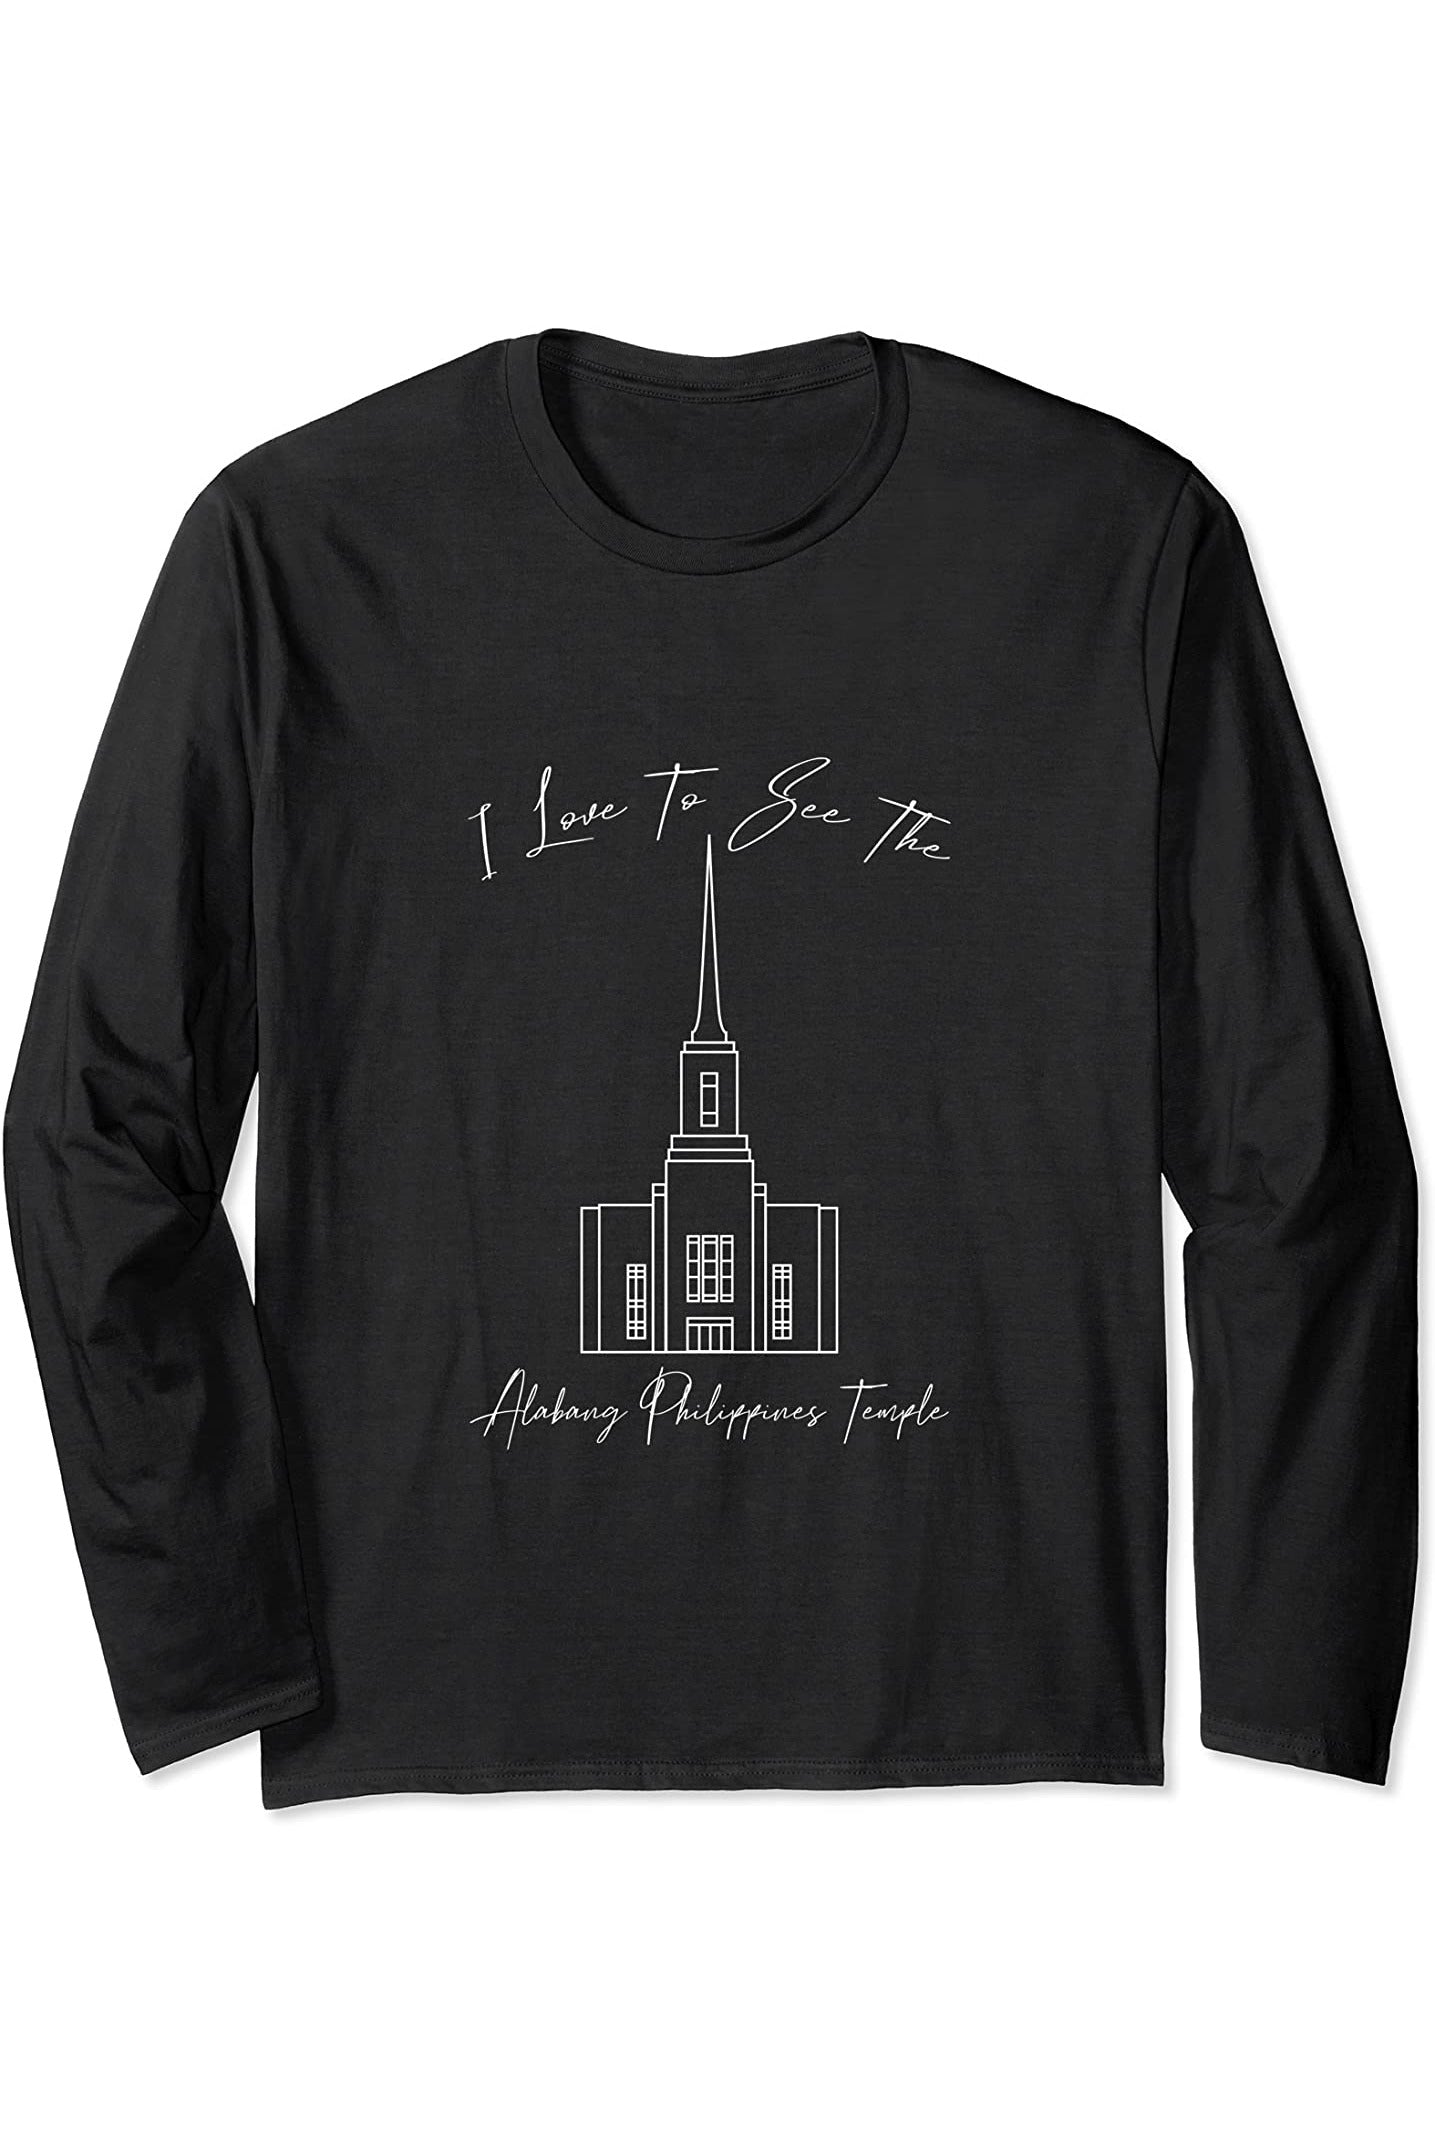 Alabang Philippines Temple Long Sleeve T-Shirt - Calligraphy Style (English) US